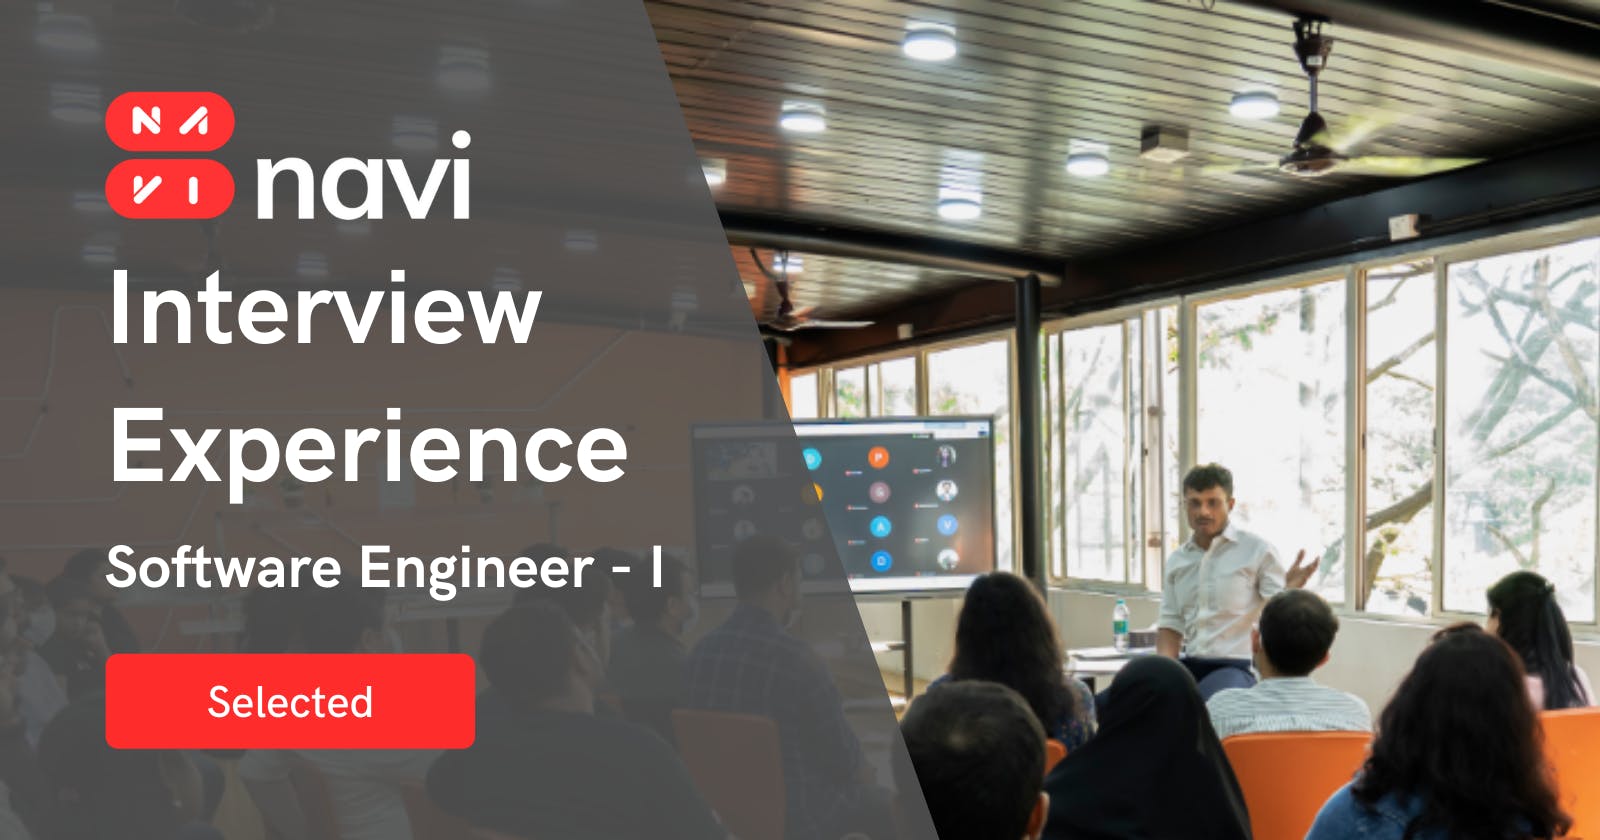 Interviewing Experience at Navi - SDE 1